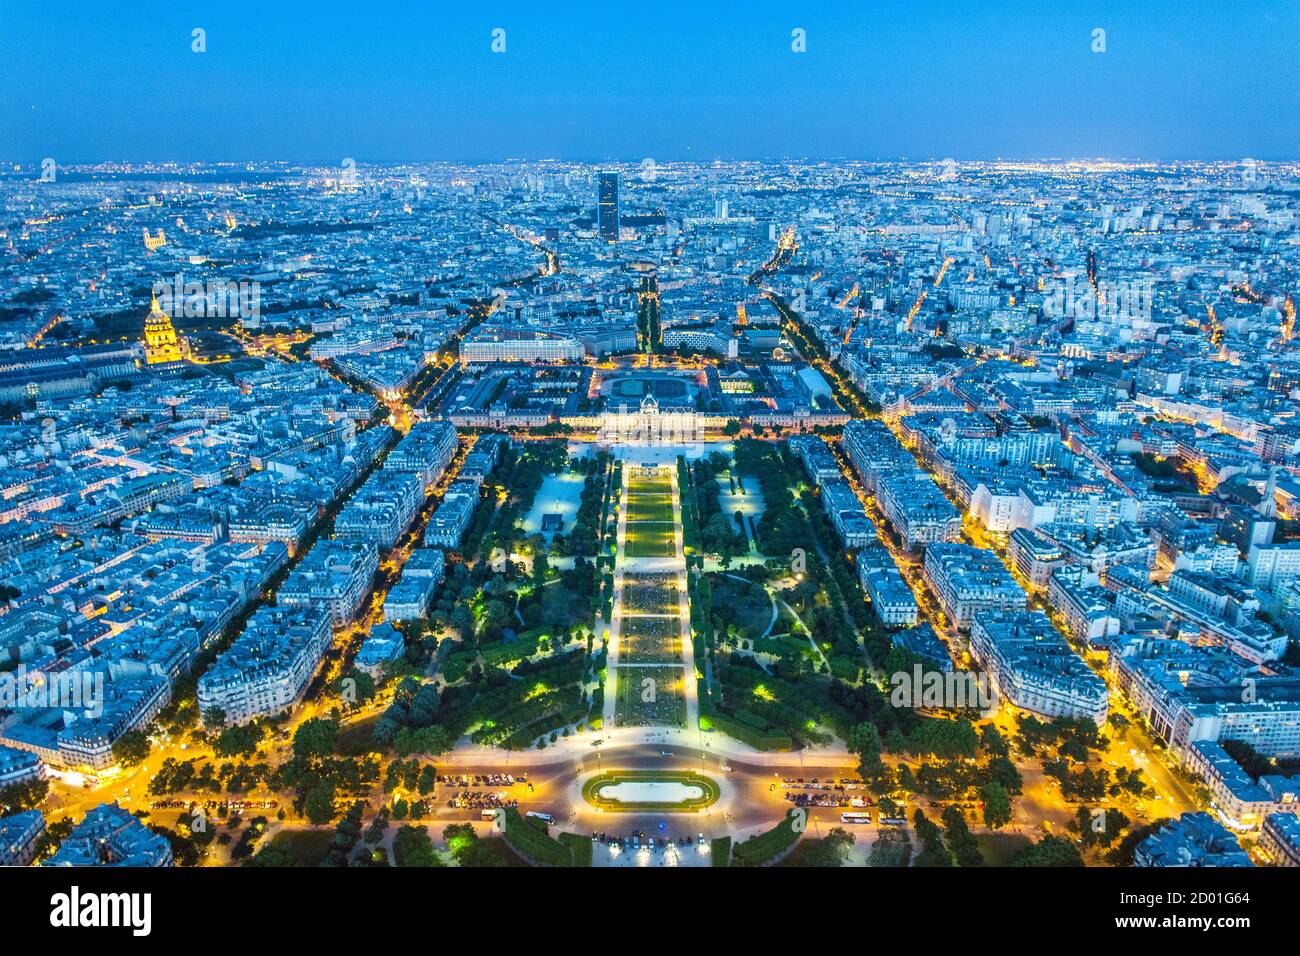 View across Paris from the top of the Eiffel Tower at dusk. Stock Photo